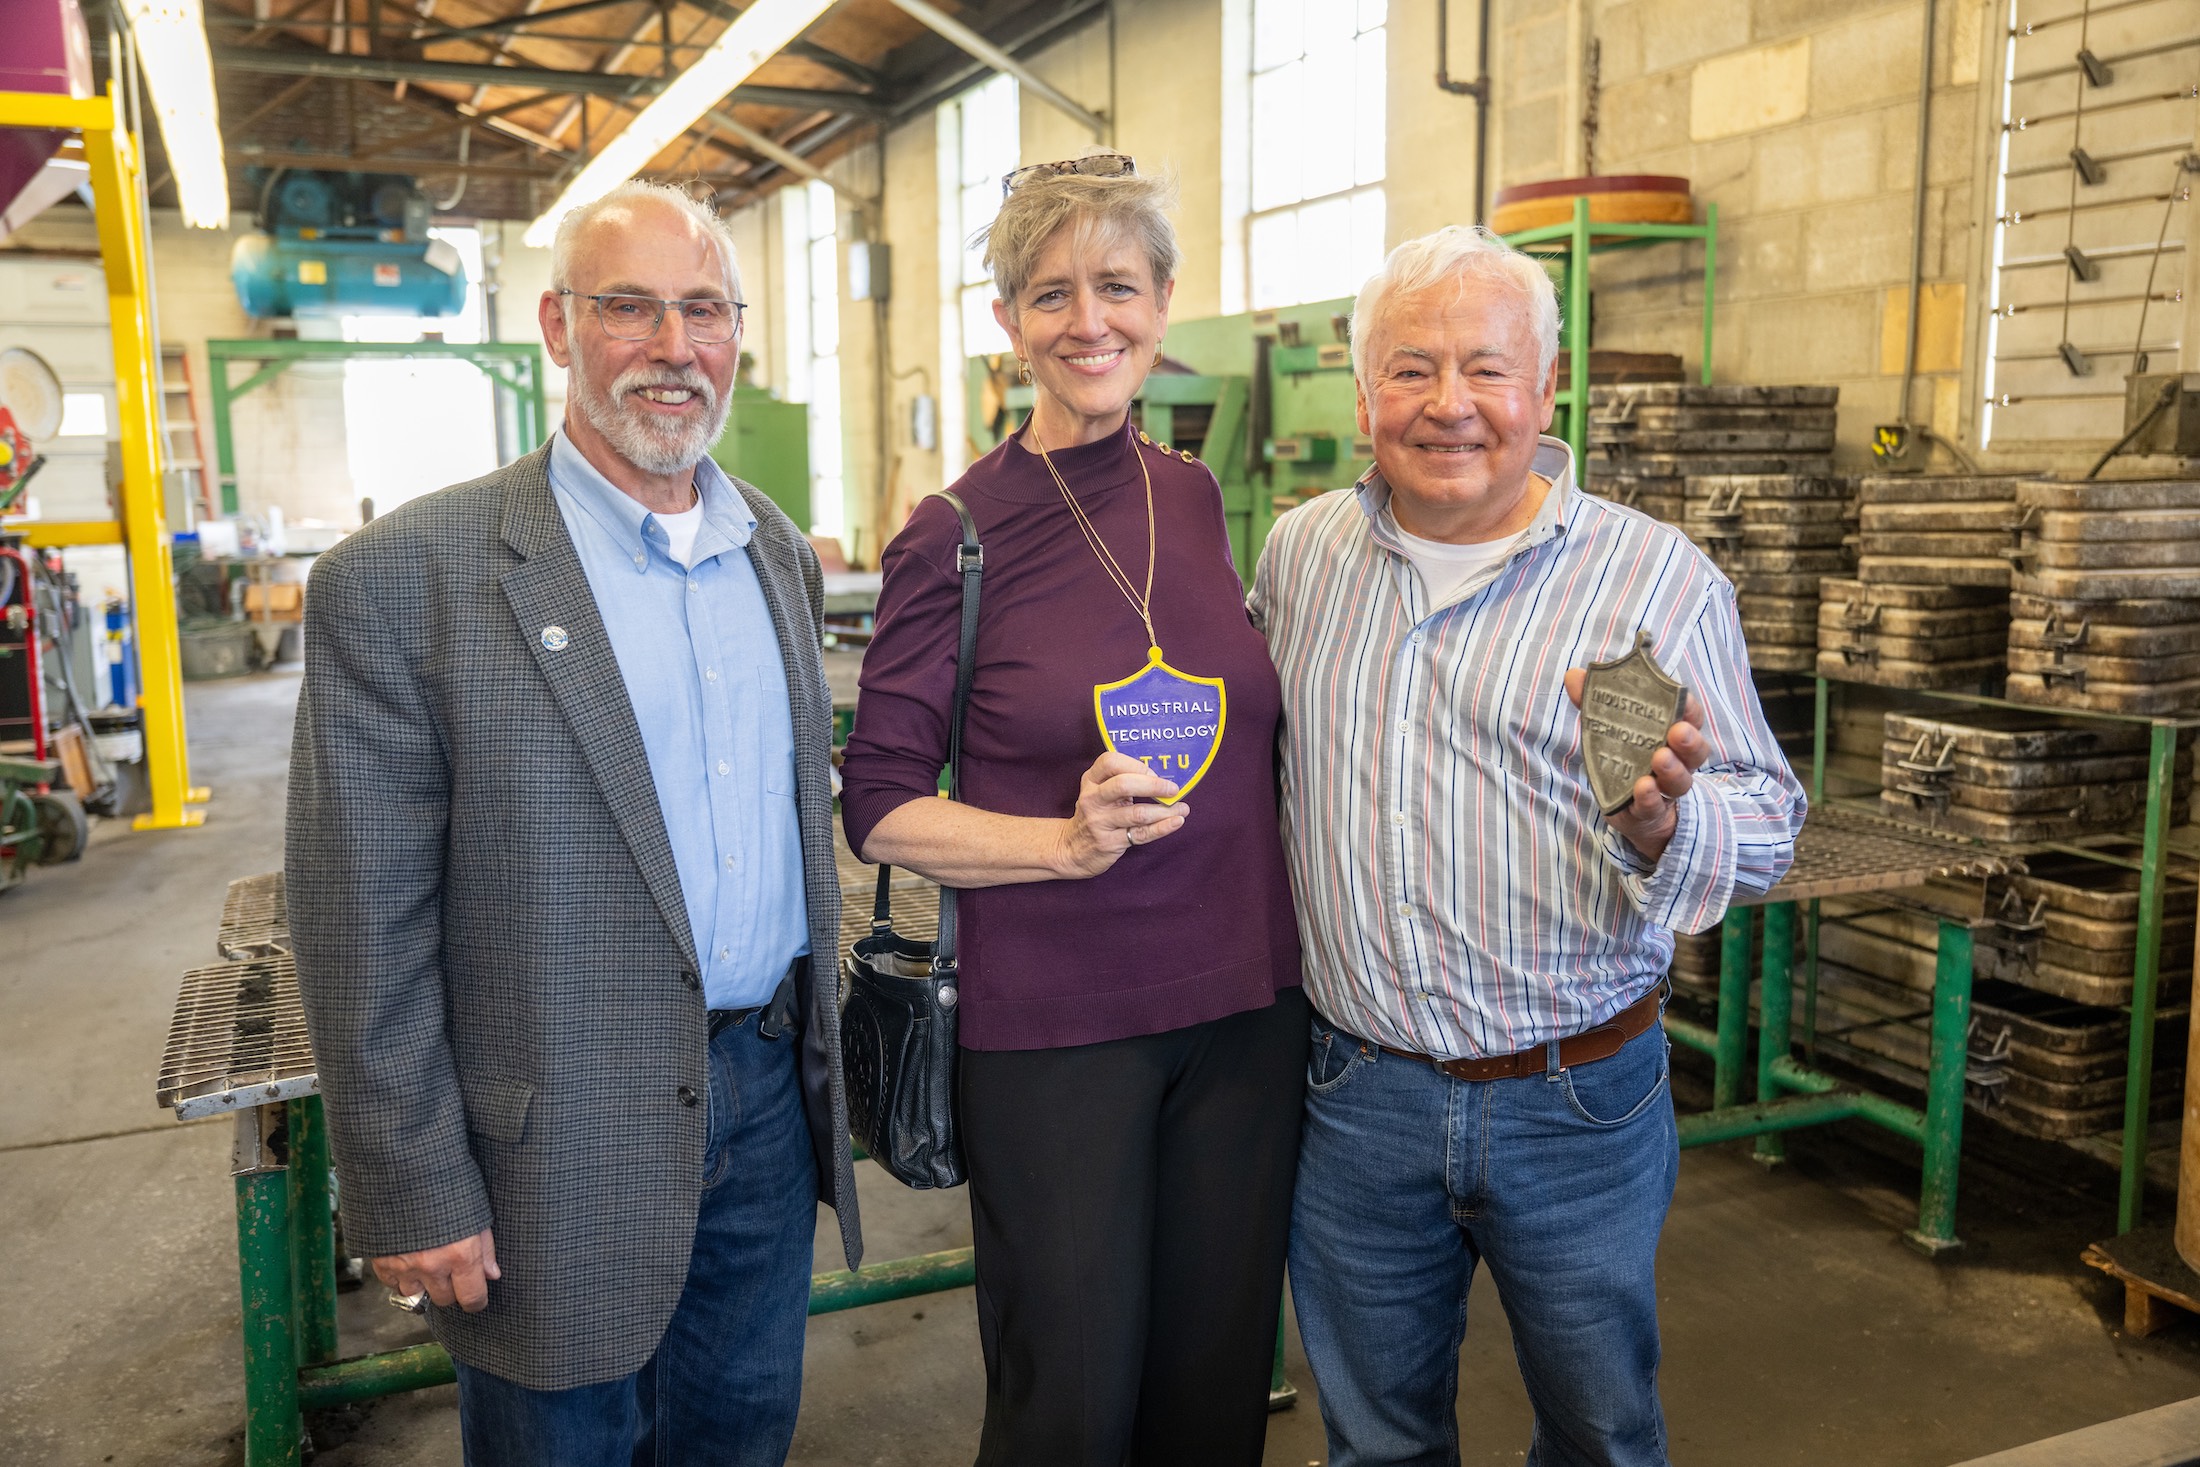 From left: Fred Vondra, chair of the Department of Manufacturing and Engineering Technology, Trudy Harper, chair of the Board of Trustees, and Gary Durham, former Tech student, are pictured inside the current Tech foundry. Harper is holding a metal placard Durham made at the foundry during his years as a Tech student and later gifted to her. Durham is holding the original mold used to make the placard. 